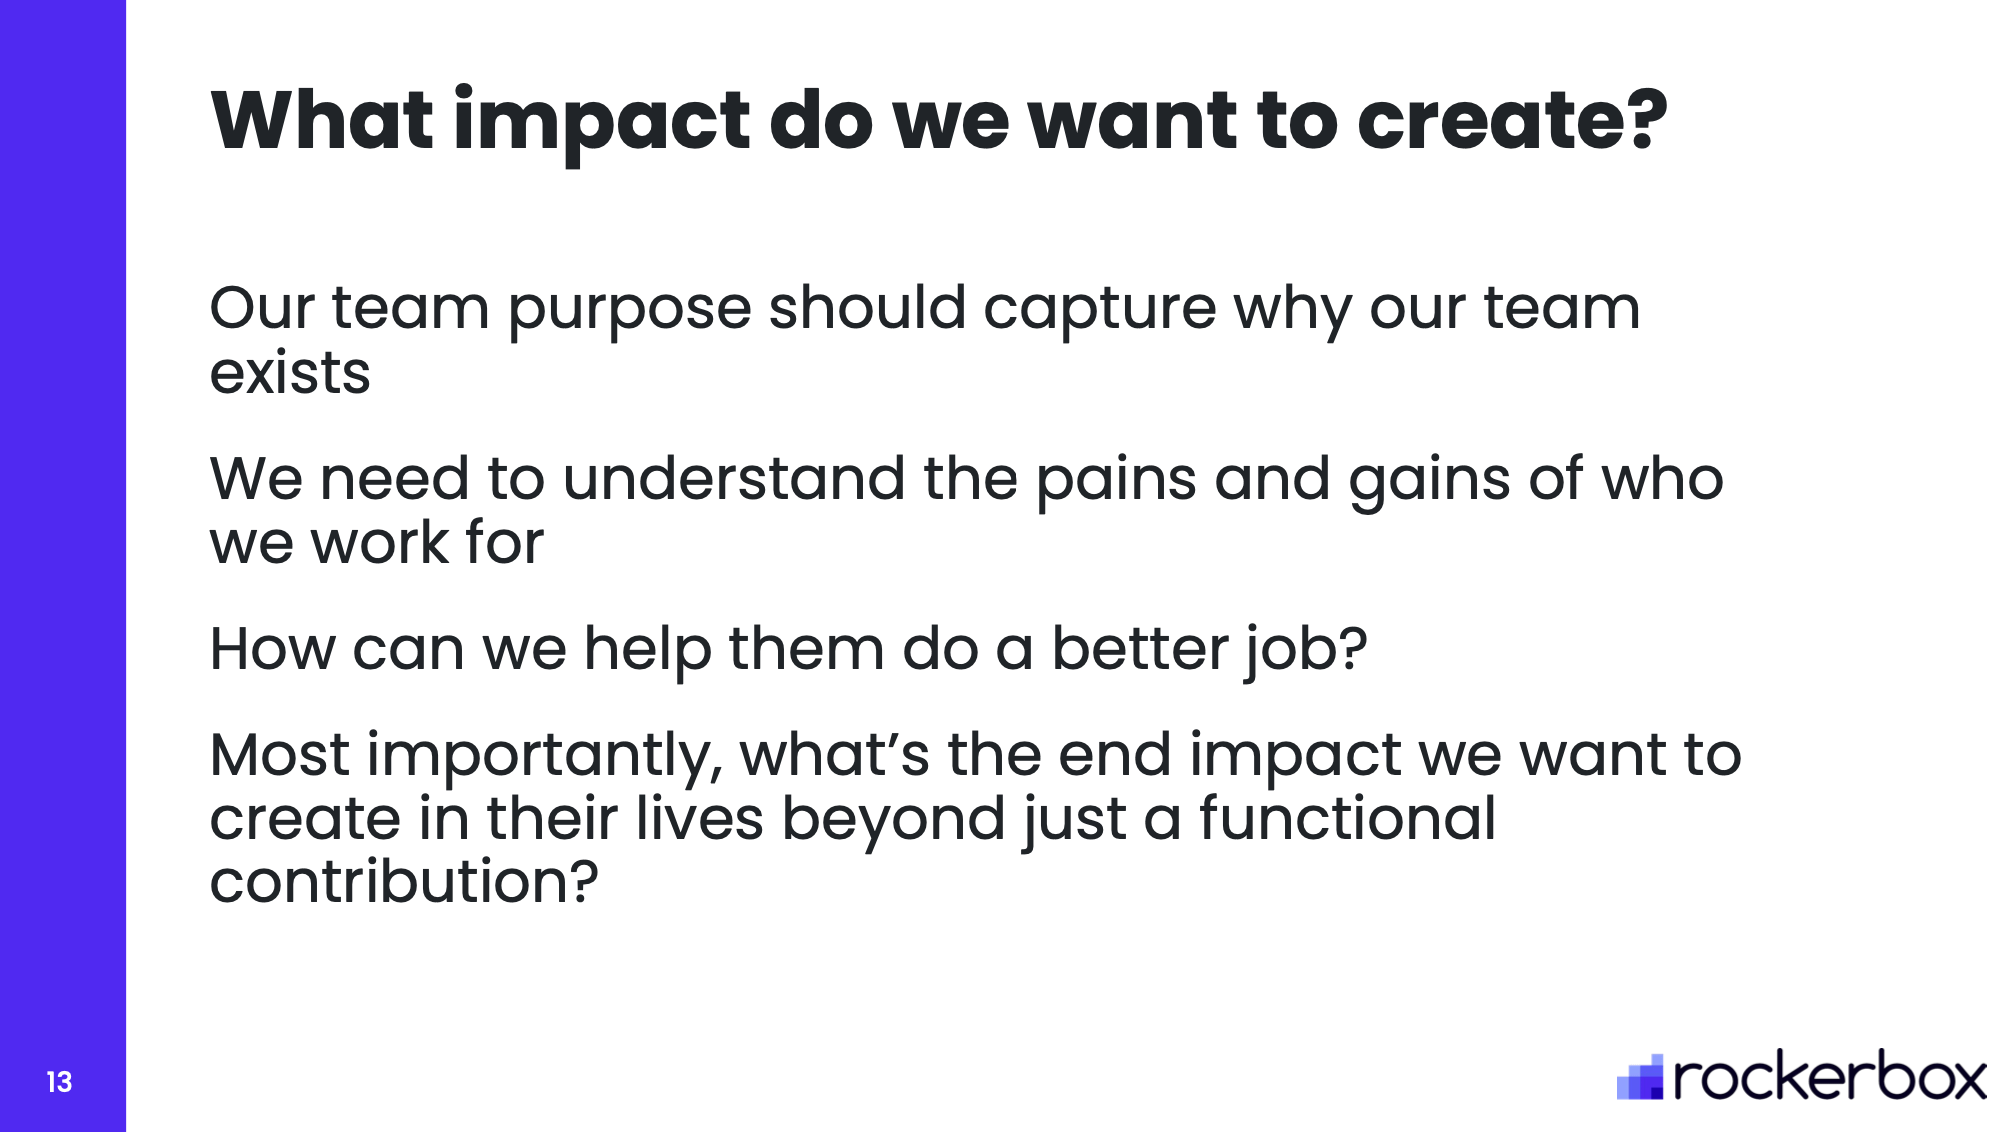 What impact do we want to create